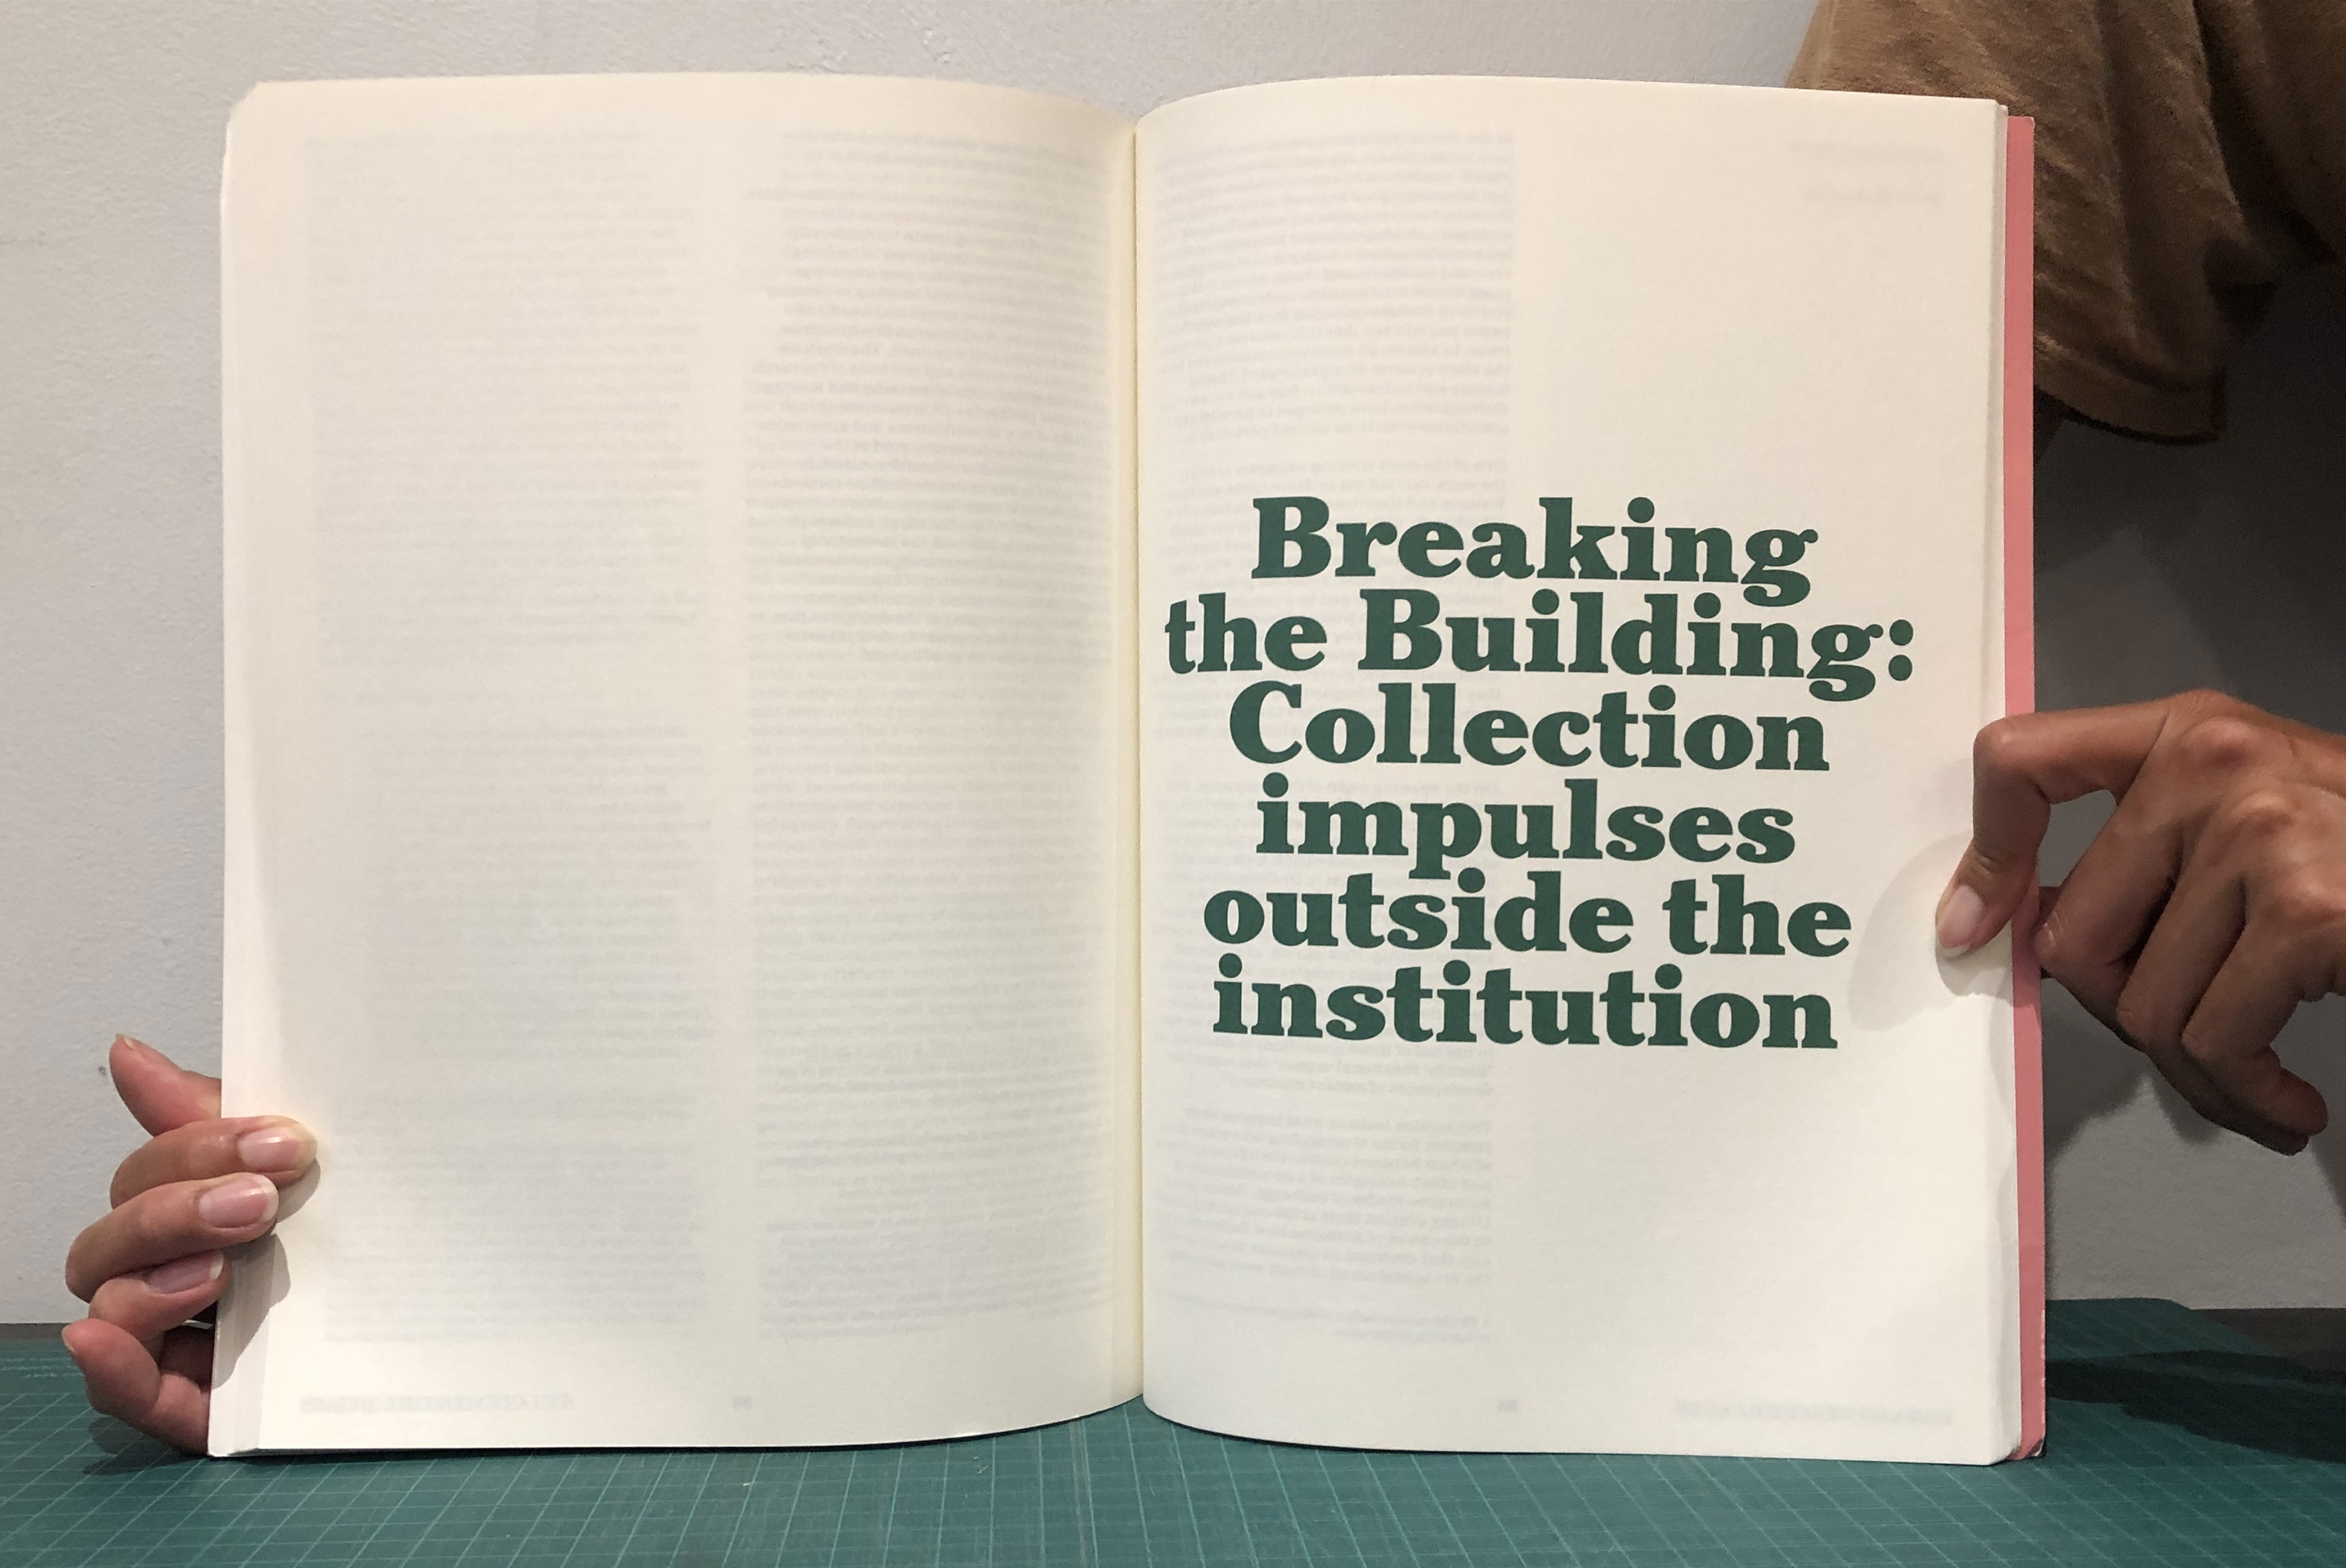 A book being held open to reveal a spread that reads “Breaking the Building: Collection impulses outside the institution” in green writing.